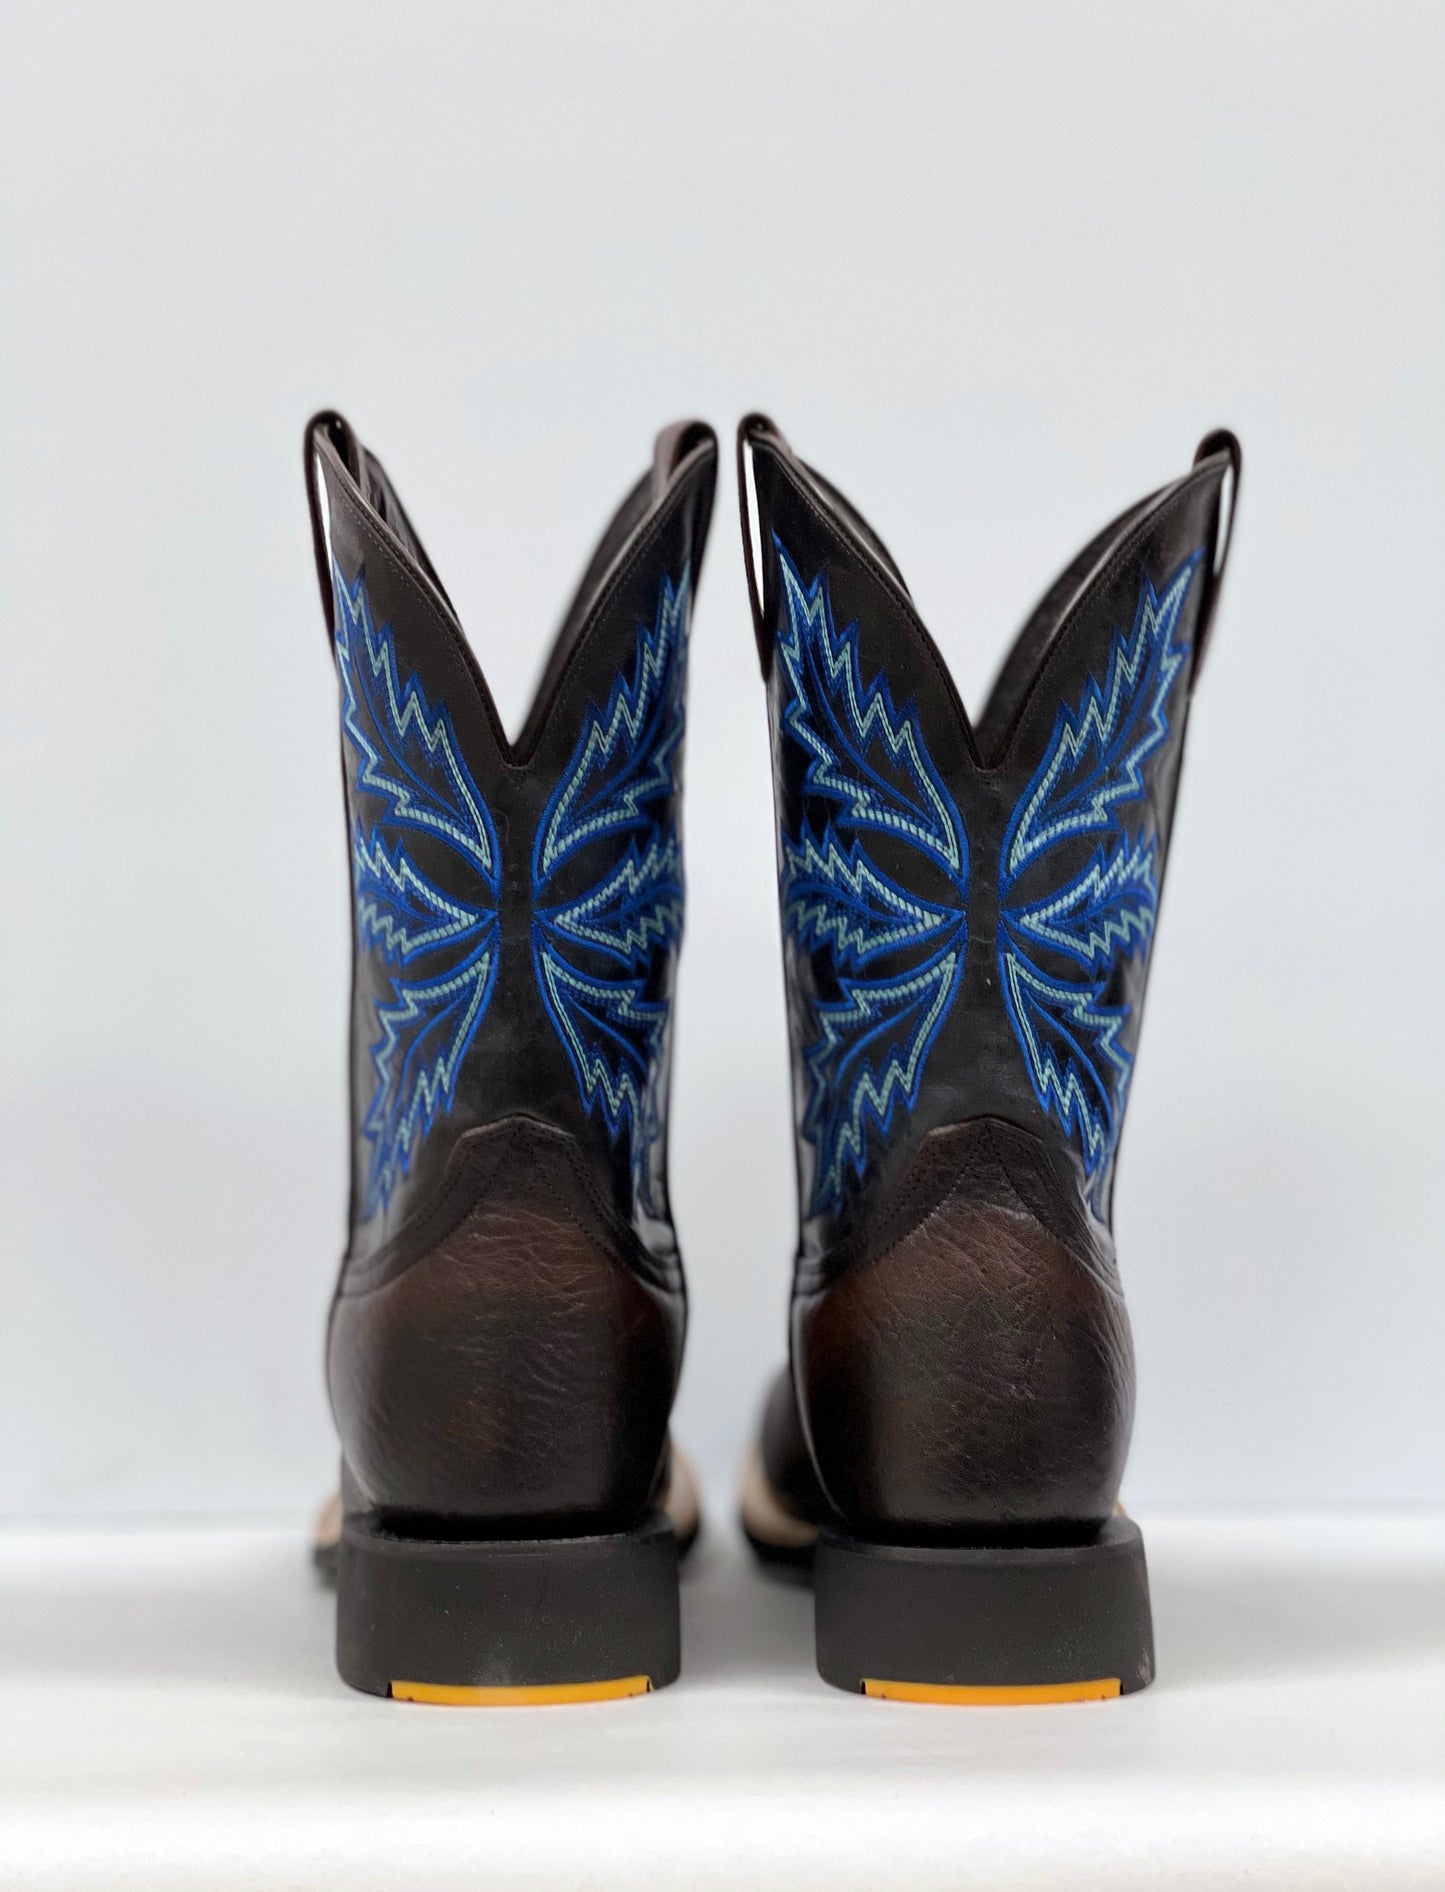 French's Music City Collection - Men's Shrunken Chocolate Boots